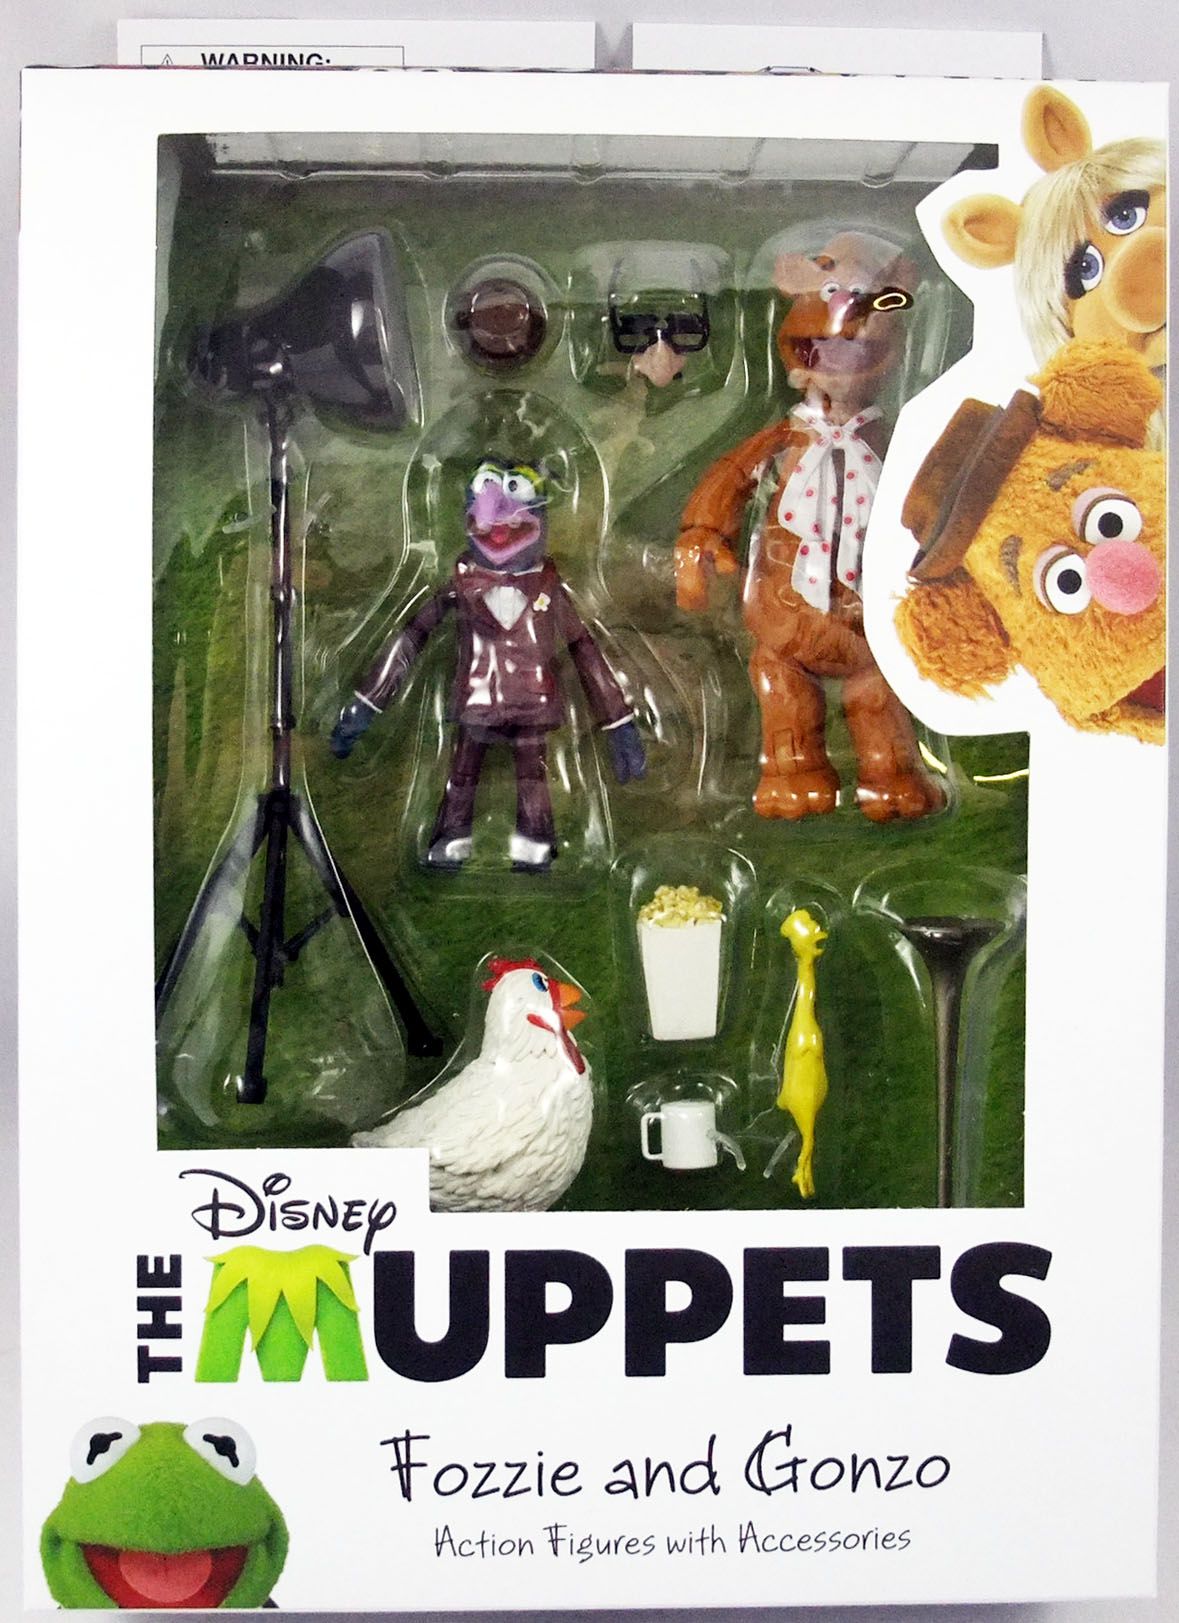 Details about   The Muppets Select Best of Series 1 Set Fozzie, Gonzo, Kermit, Piggy, Rowlf